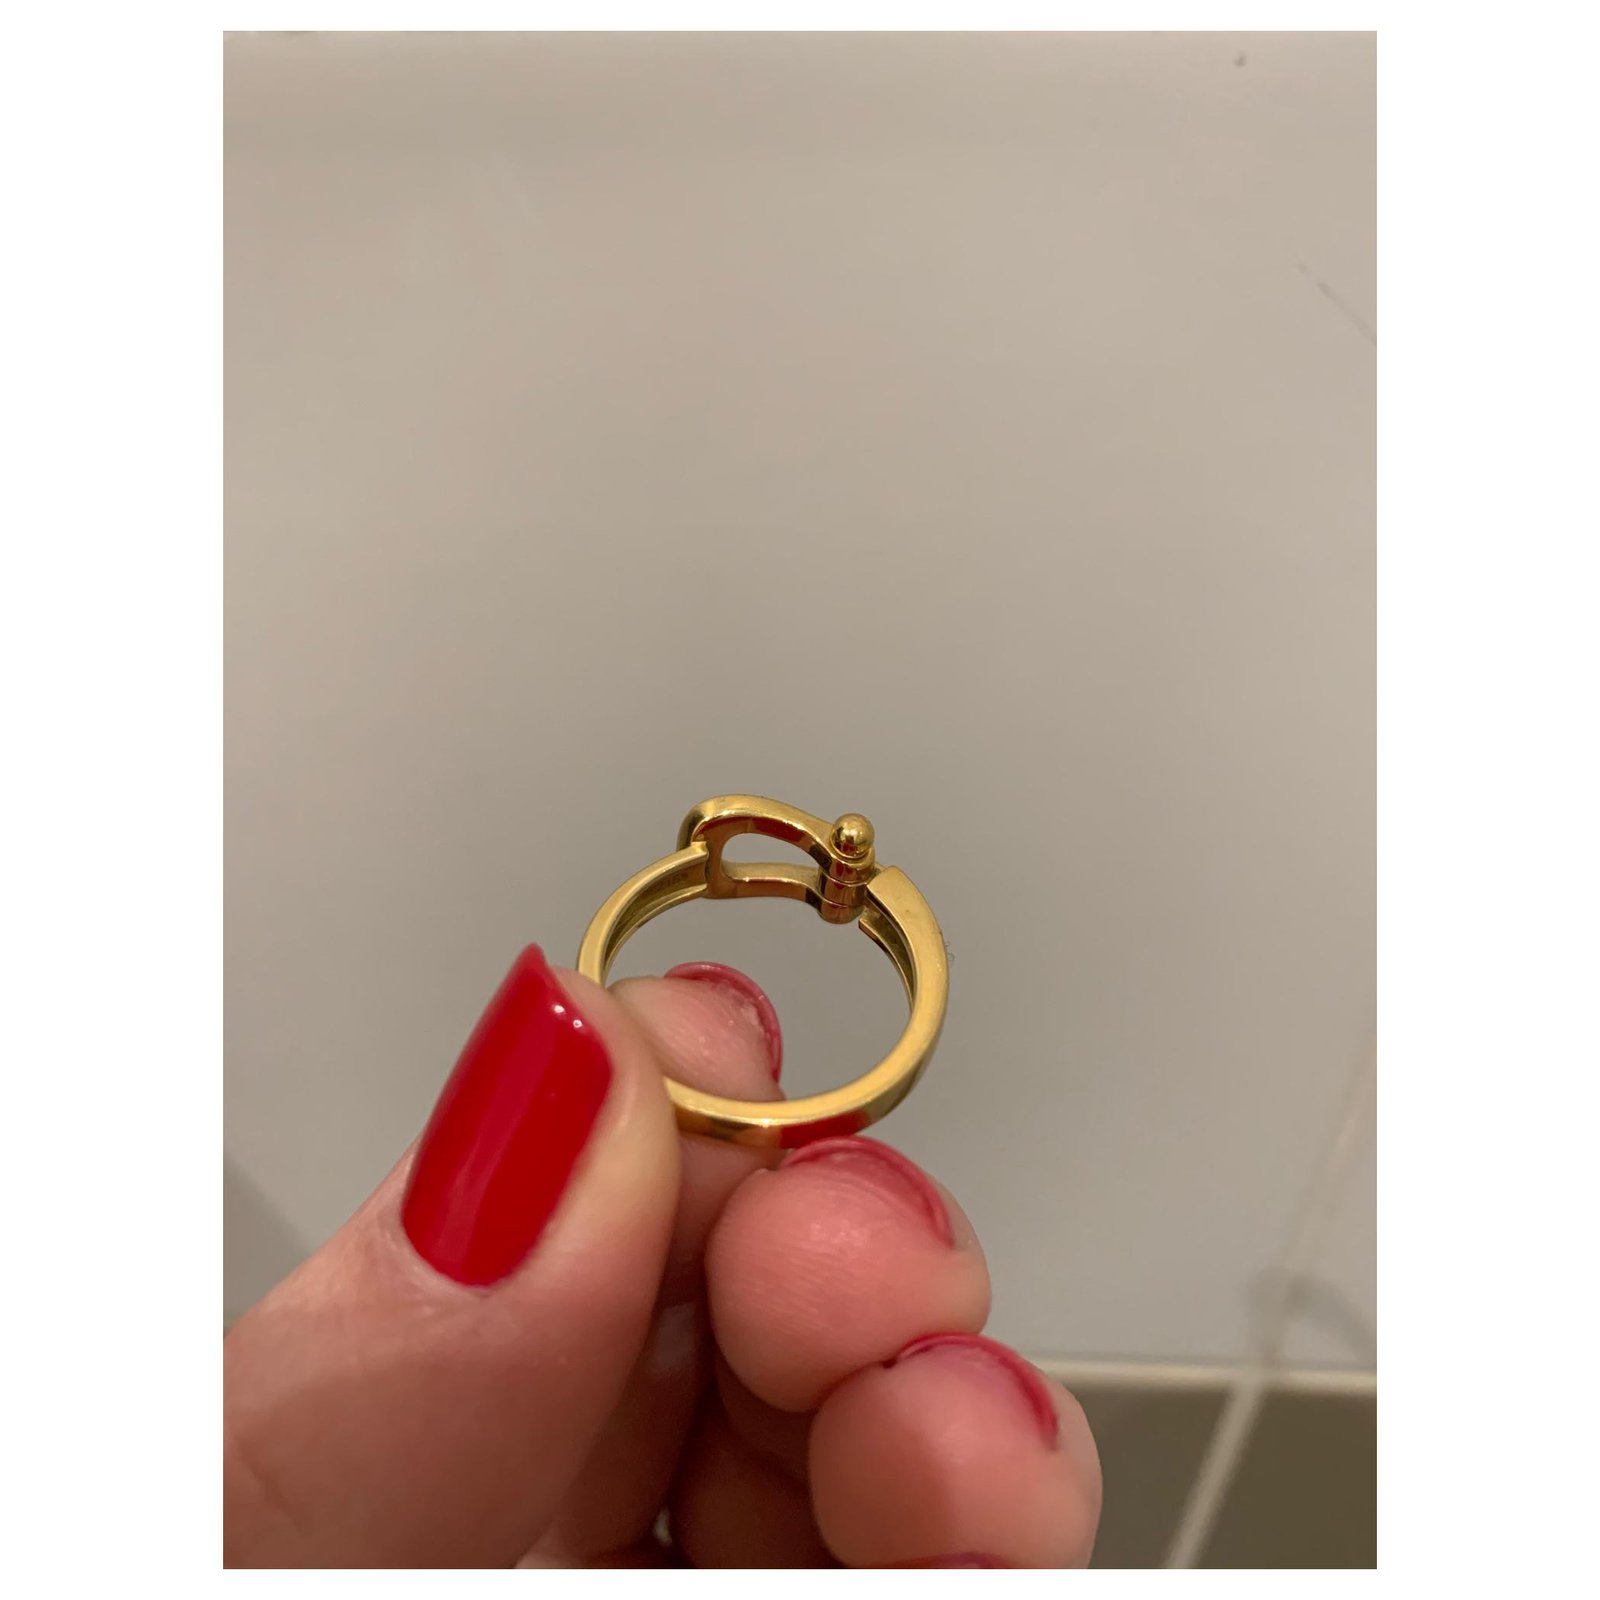 Fred Force 10 Ruban Ring Size 54/#14 Large 4C0198 18K Yellow Gold